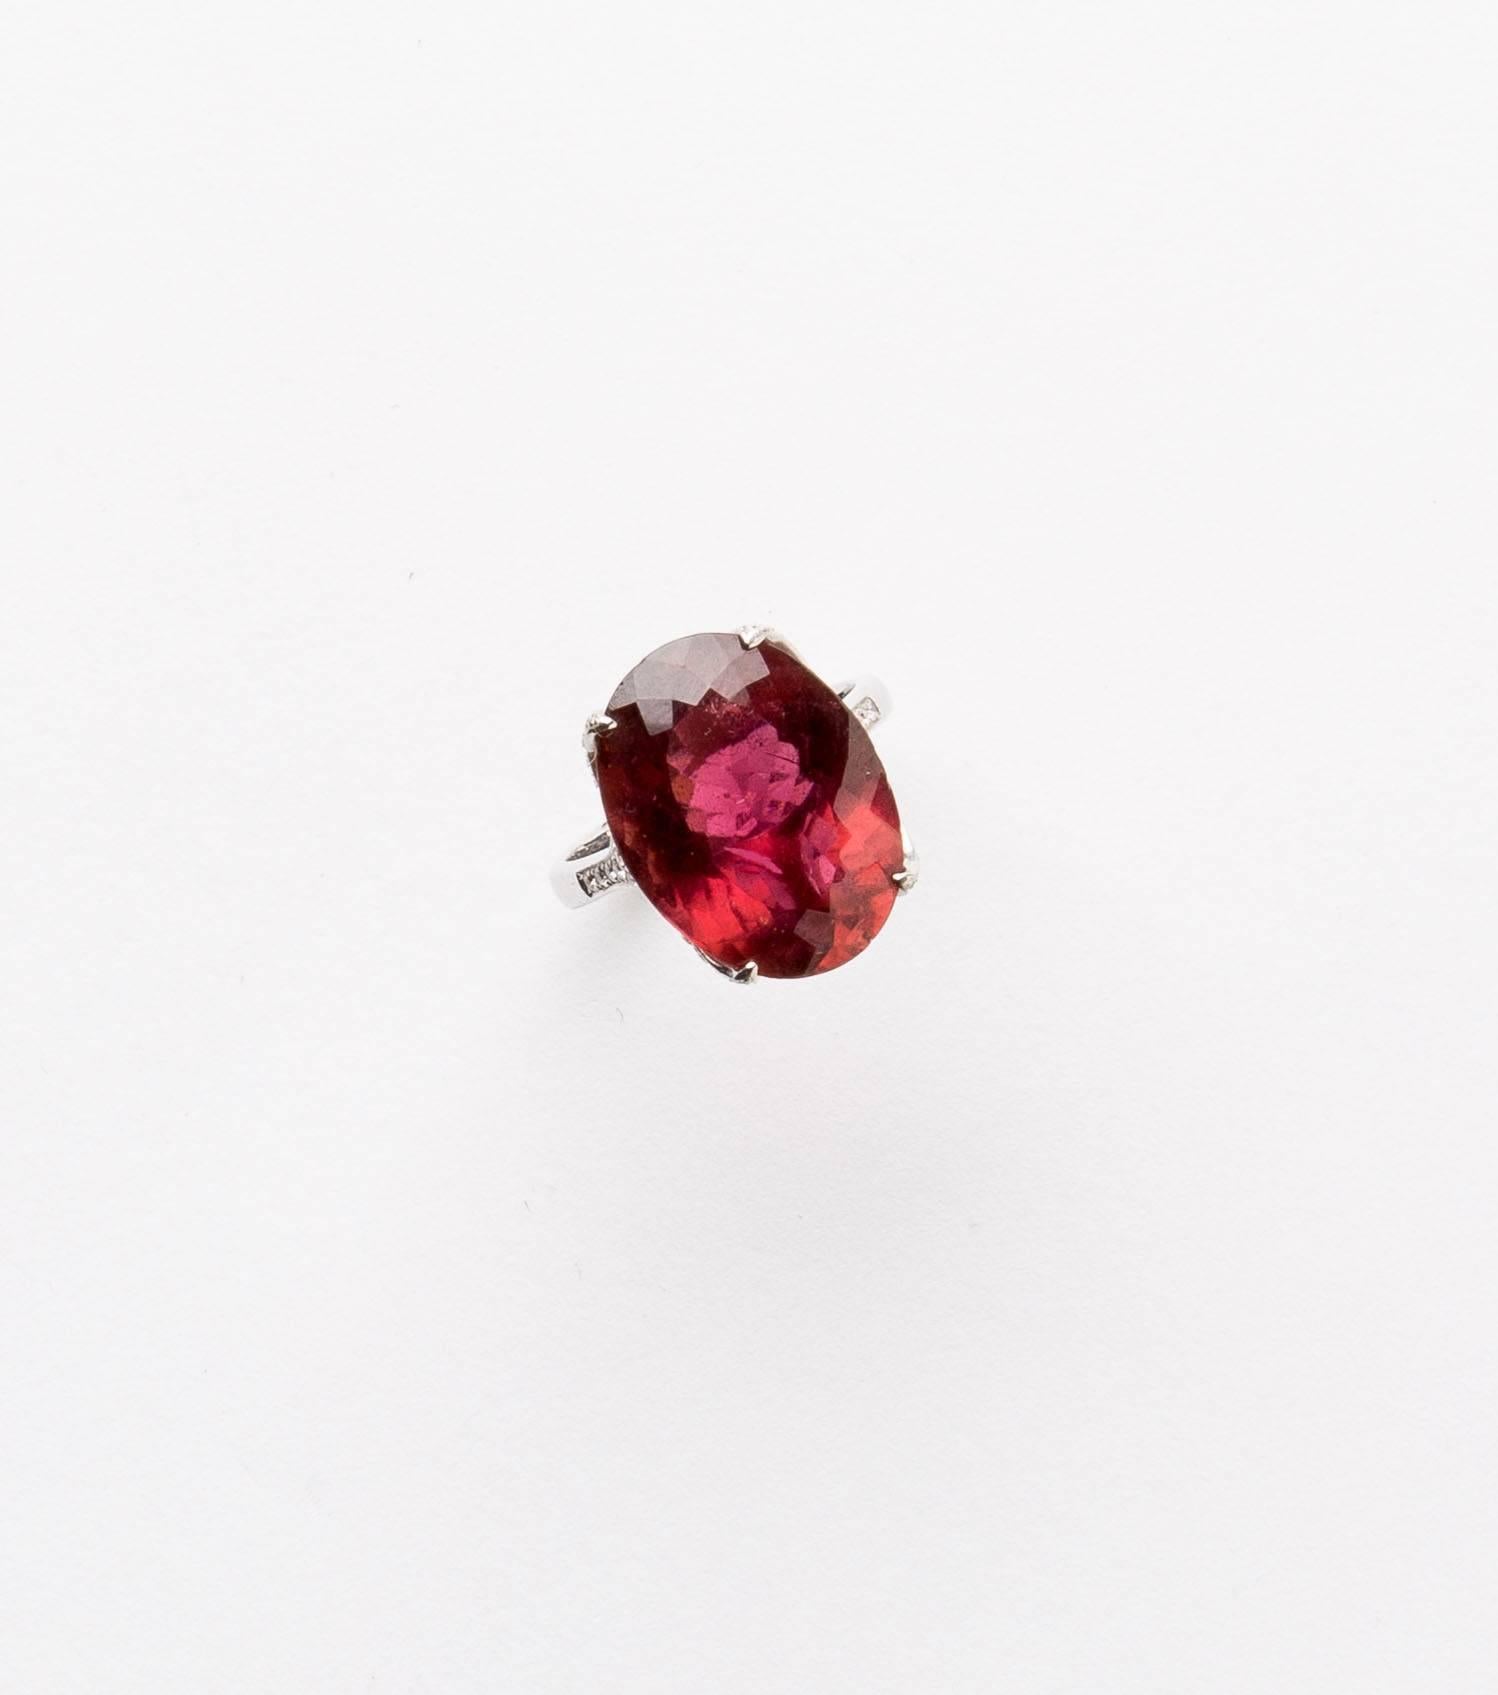 Unusual Color Tourmaline and Diamond Cocktail Ring approximately 11.98 carat stone.
The  Tourmaline is set with diamonds in an antique style setting.